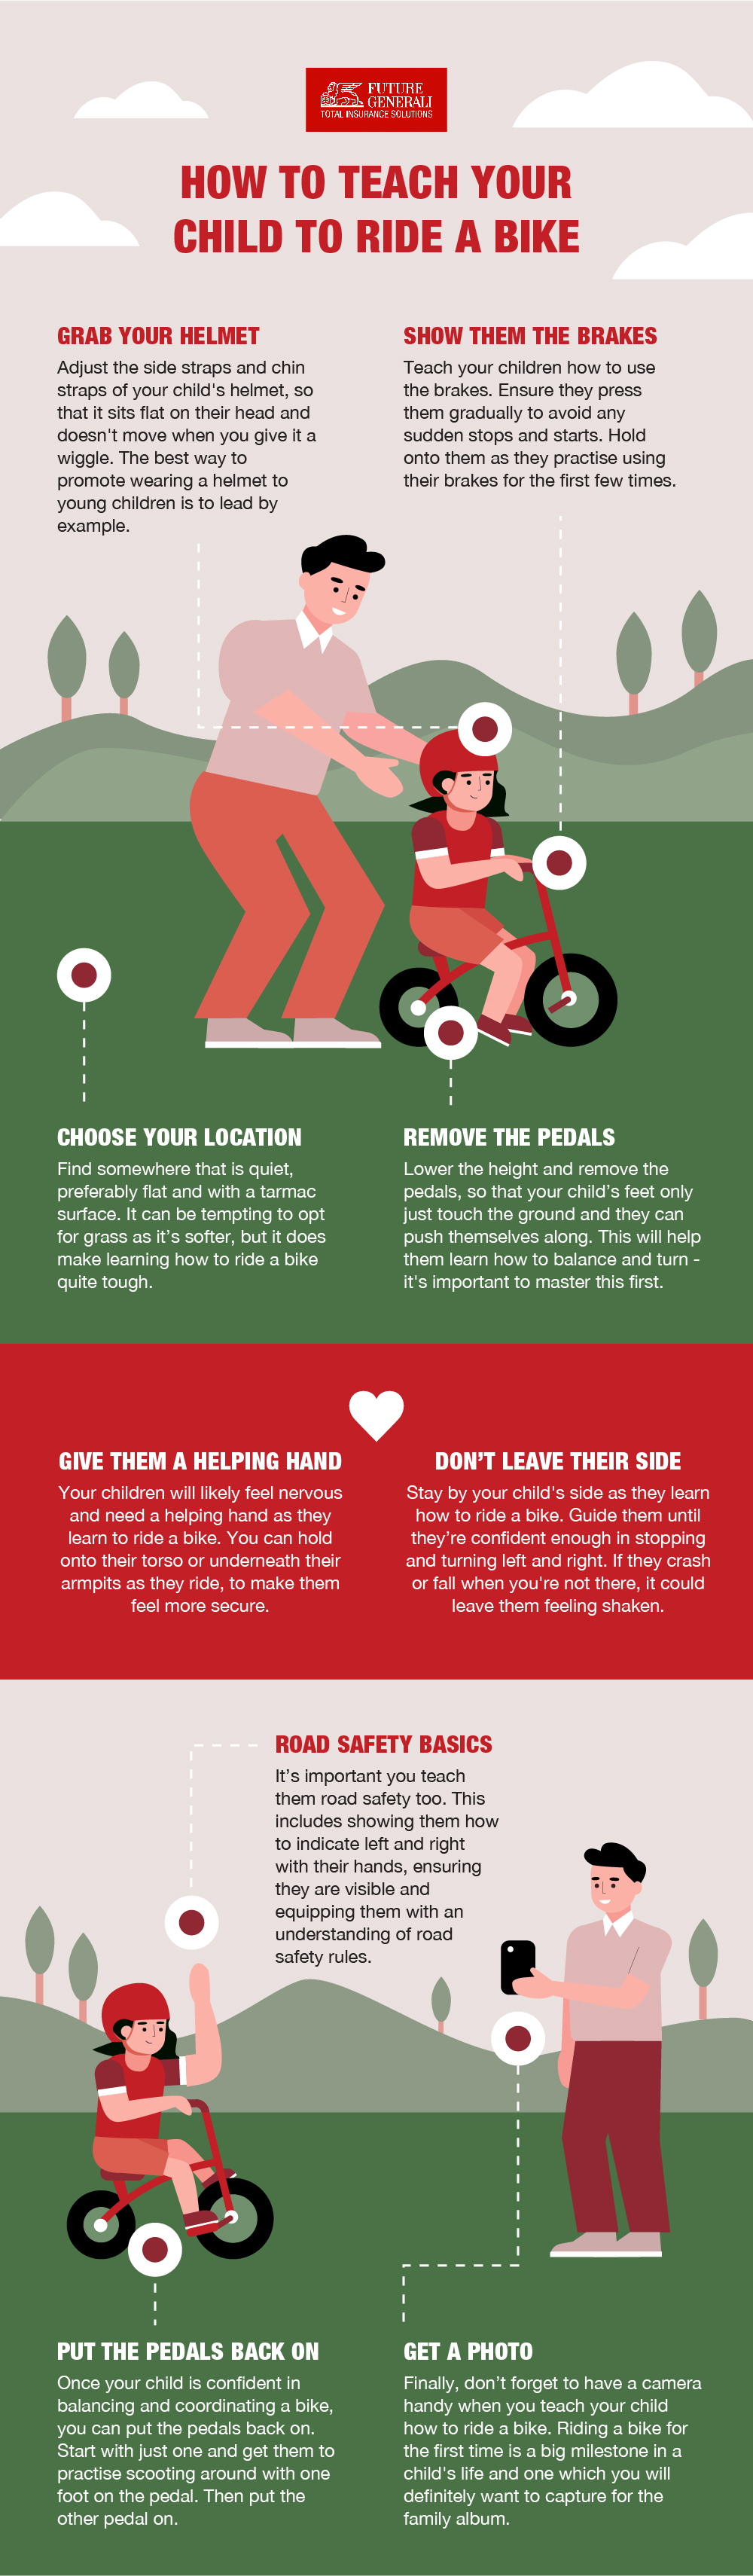 Generali_How to Teach Your Child to Ride a Bike_INIDIA_05.04.21.jpg